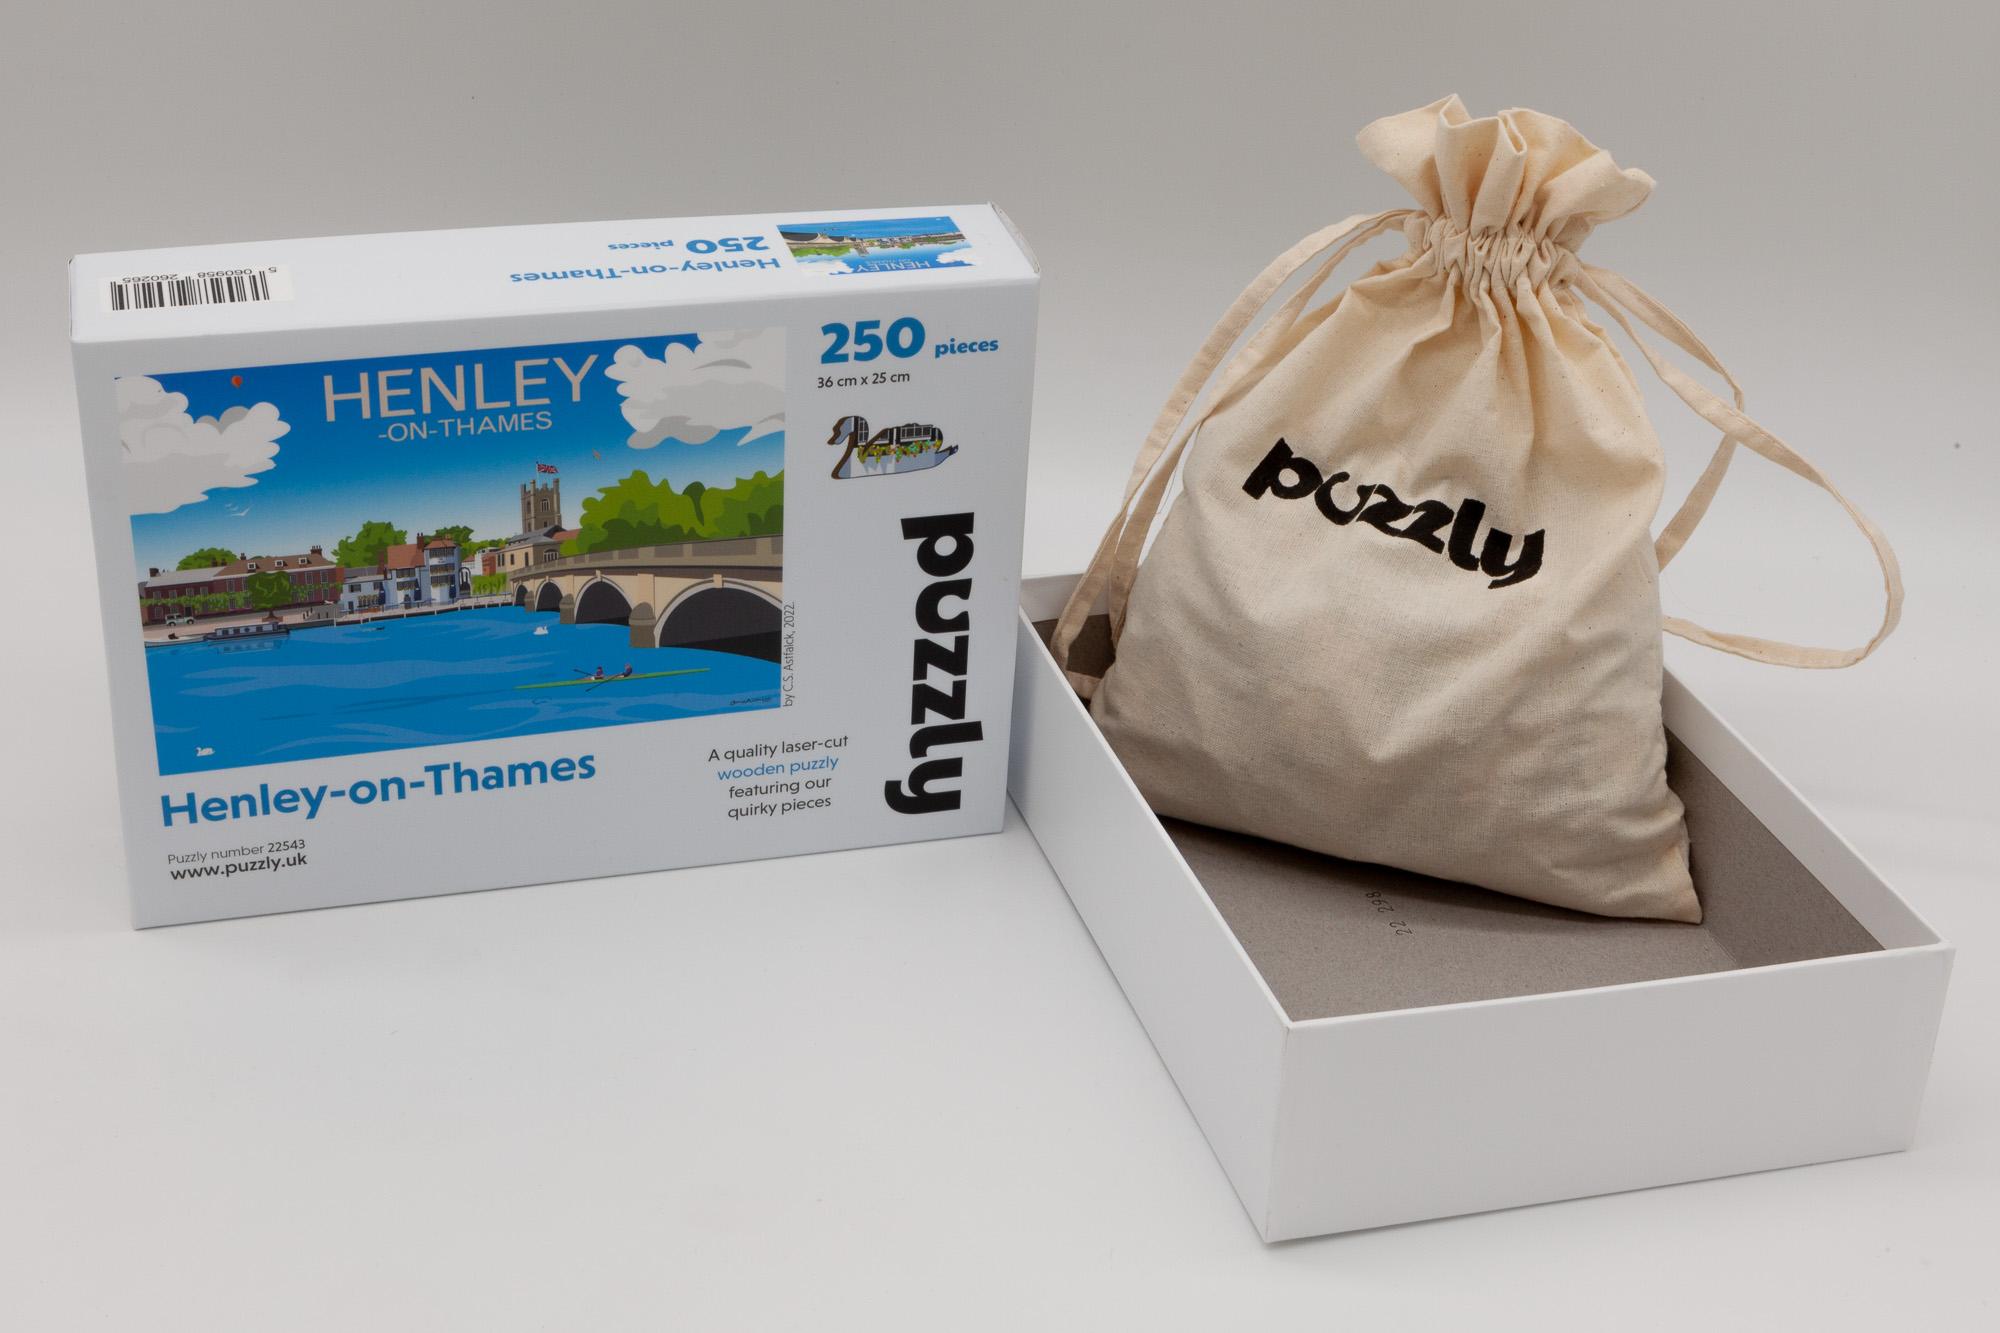 Henley-on-Thames wooden jigsaw puzzle